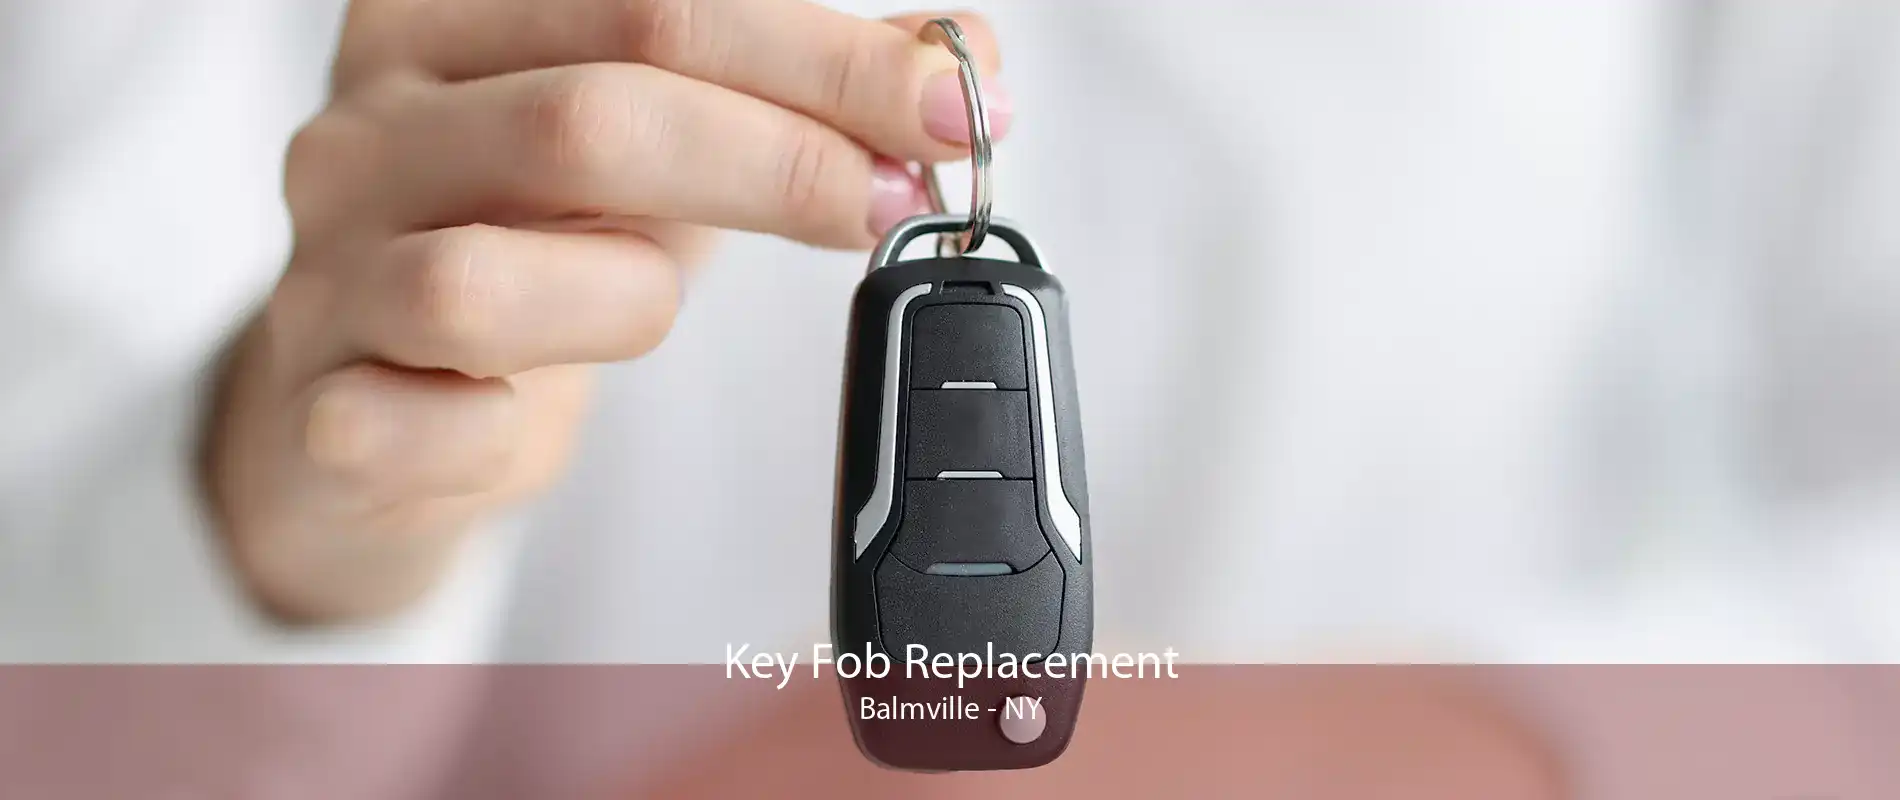 Key Fob Replacement Balmville - NY